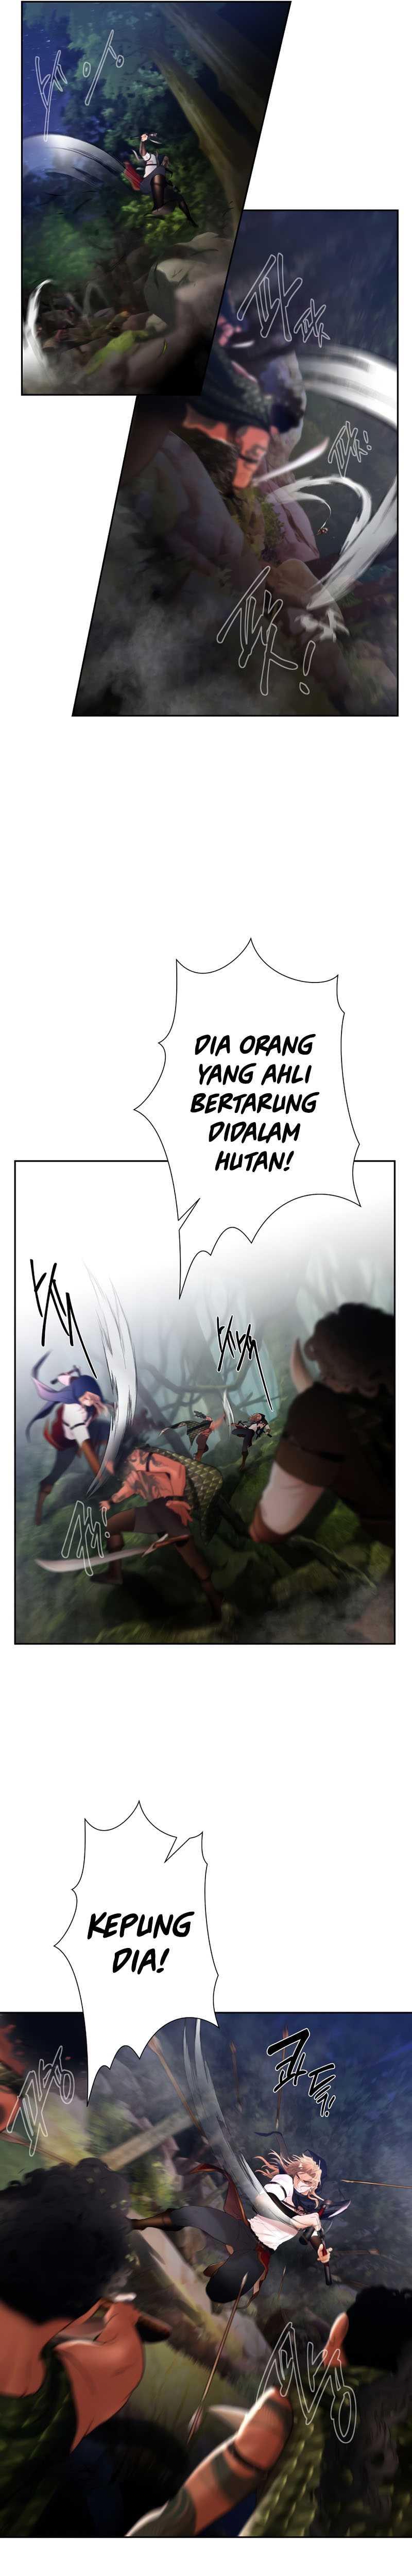 Barbarian Quest Chapter 22